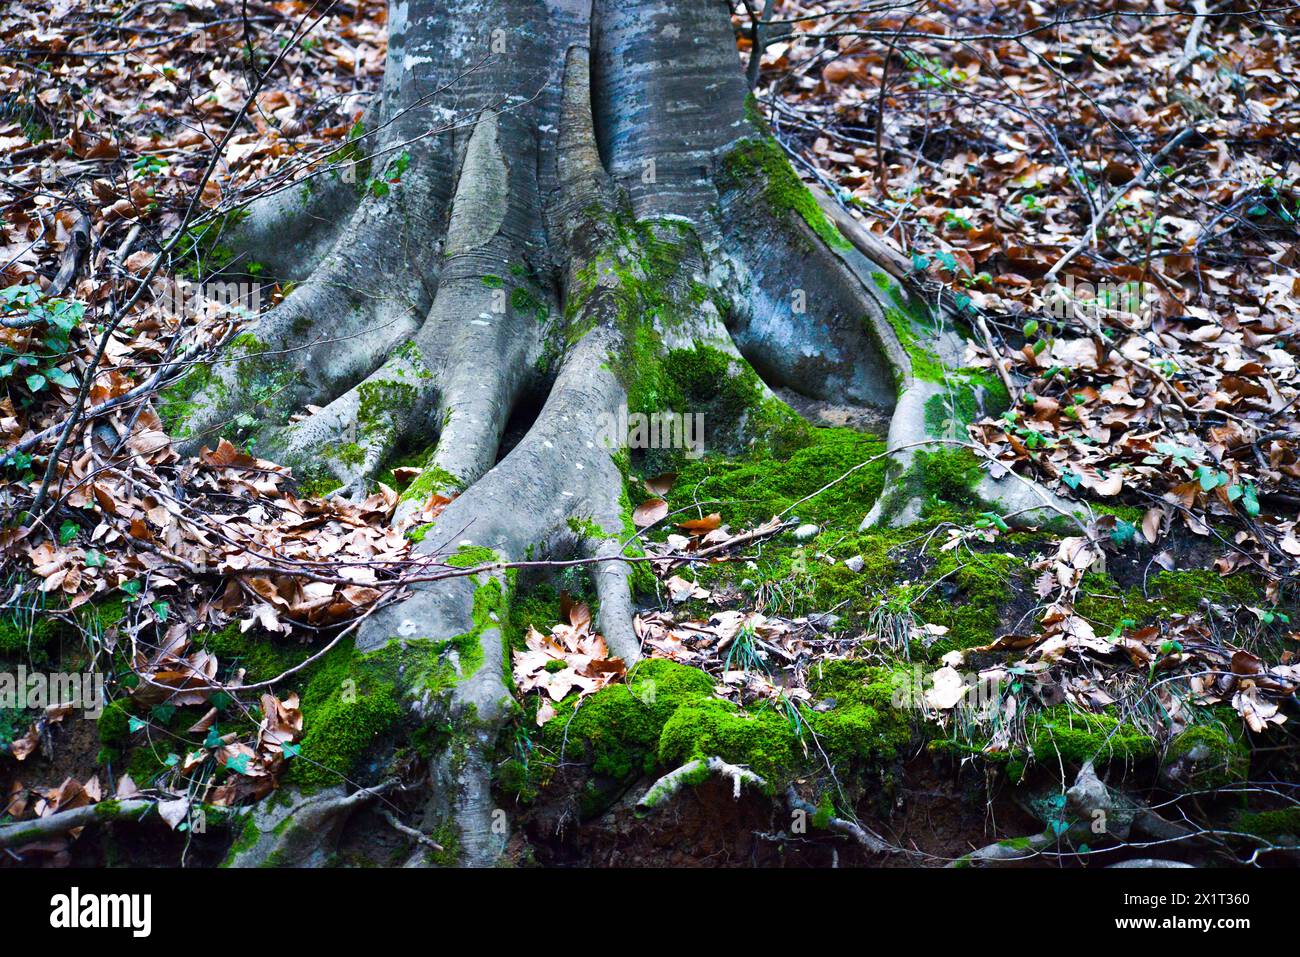 A majestic tree with sprawling roots firmly anchored in the earth, symbolizing strength and vitality amidst nature's embrace. Stock Photo